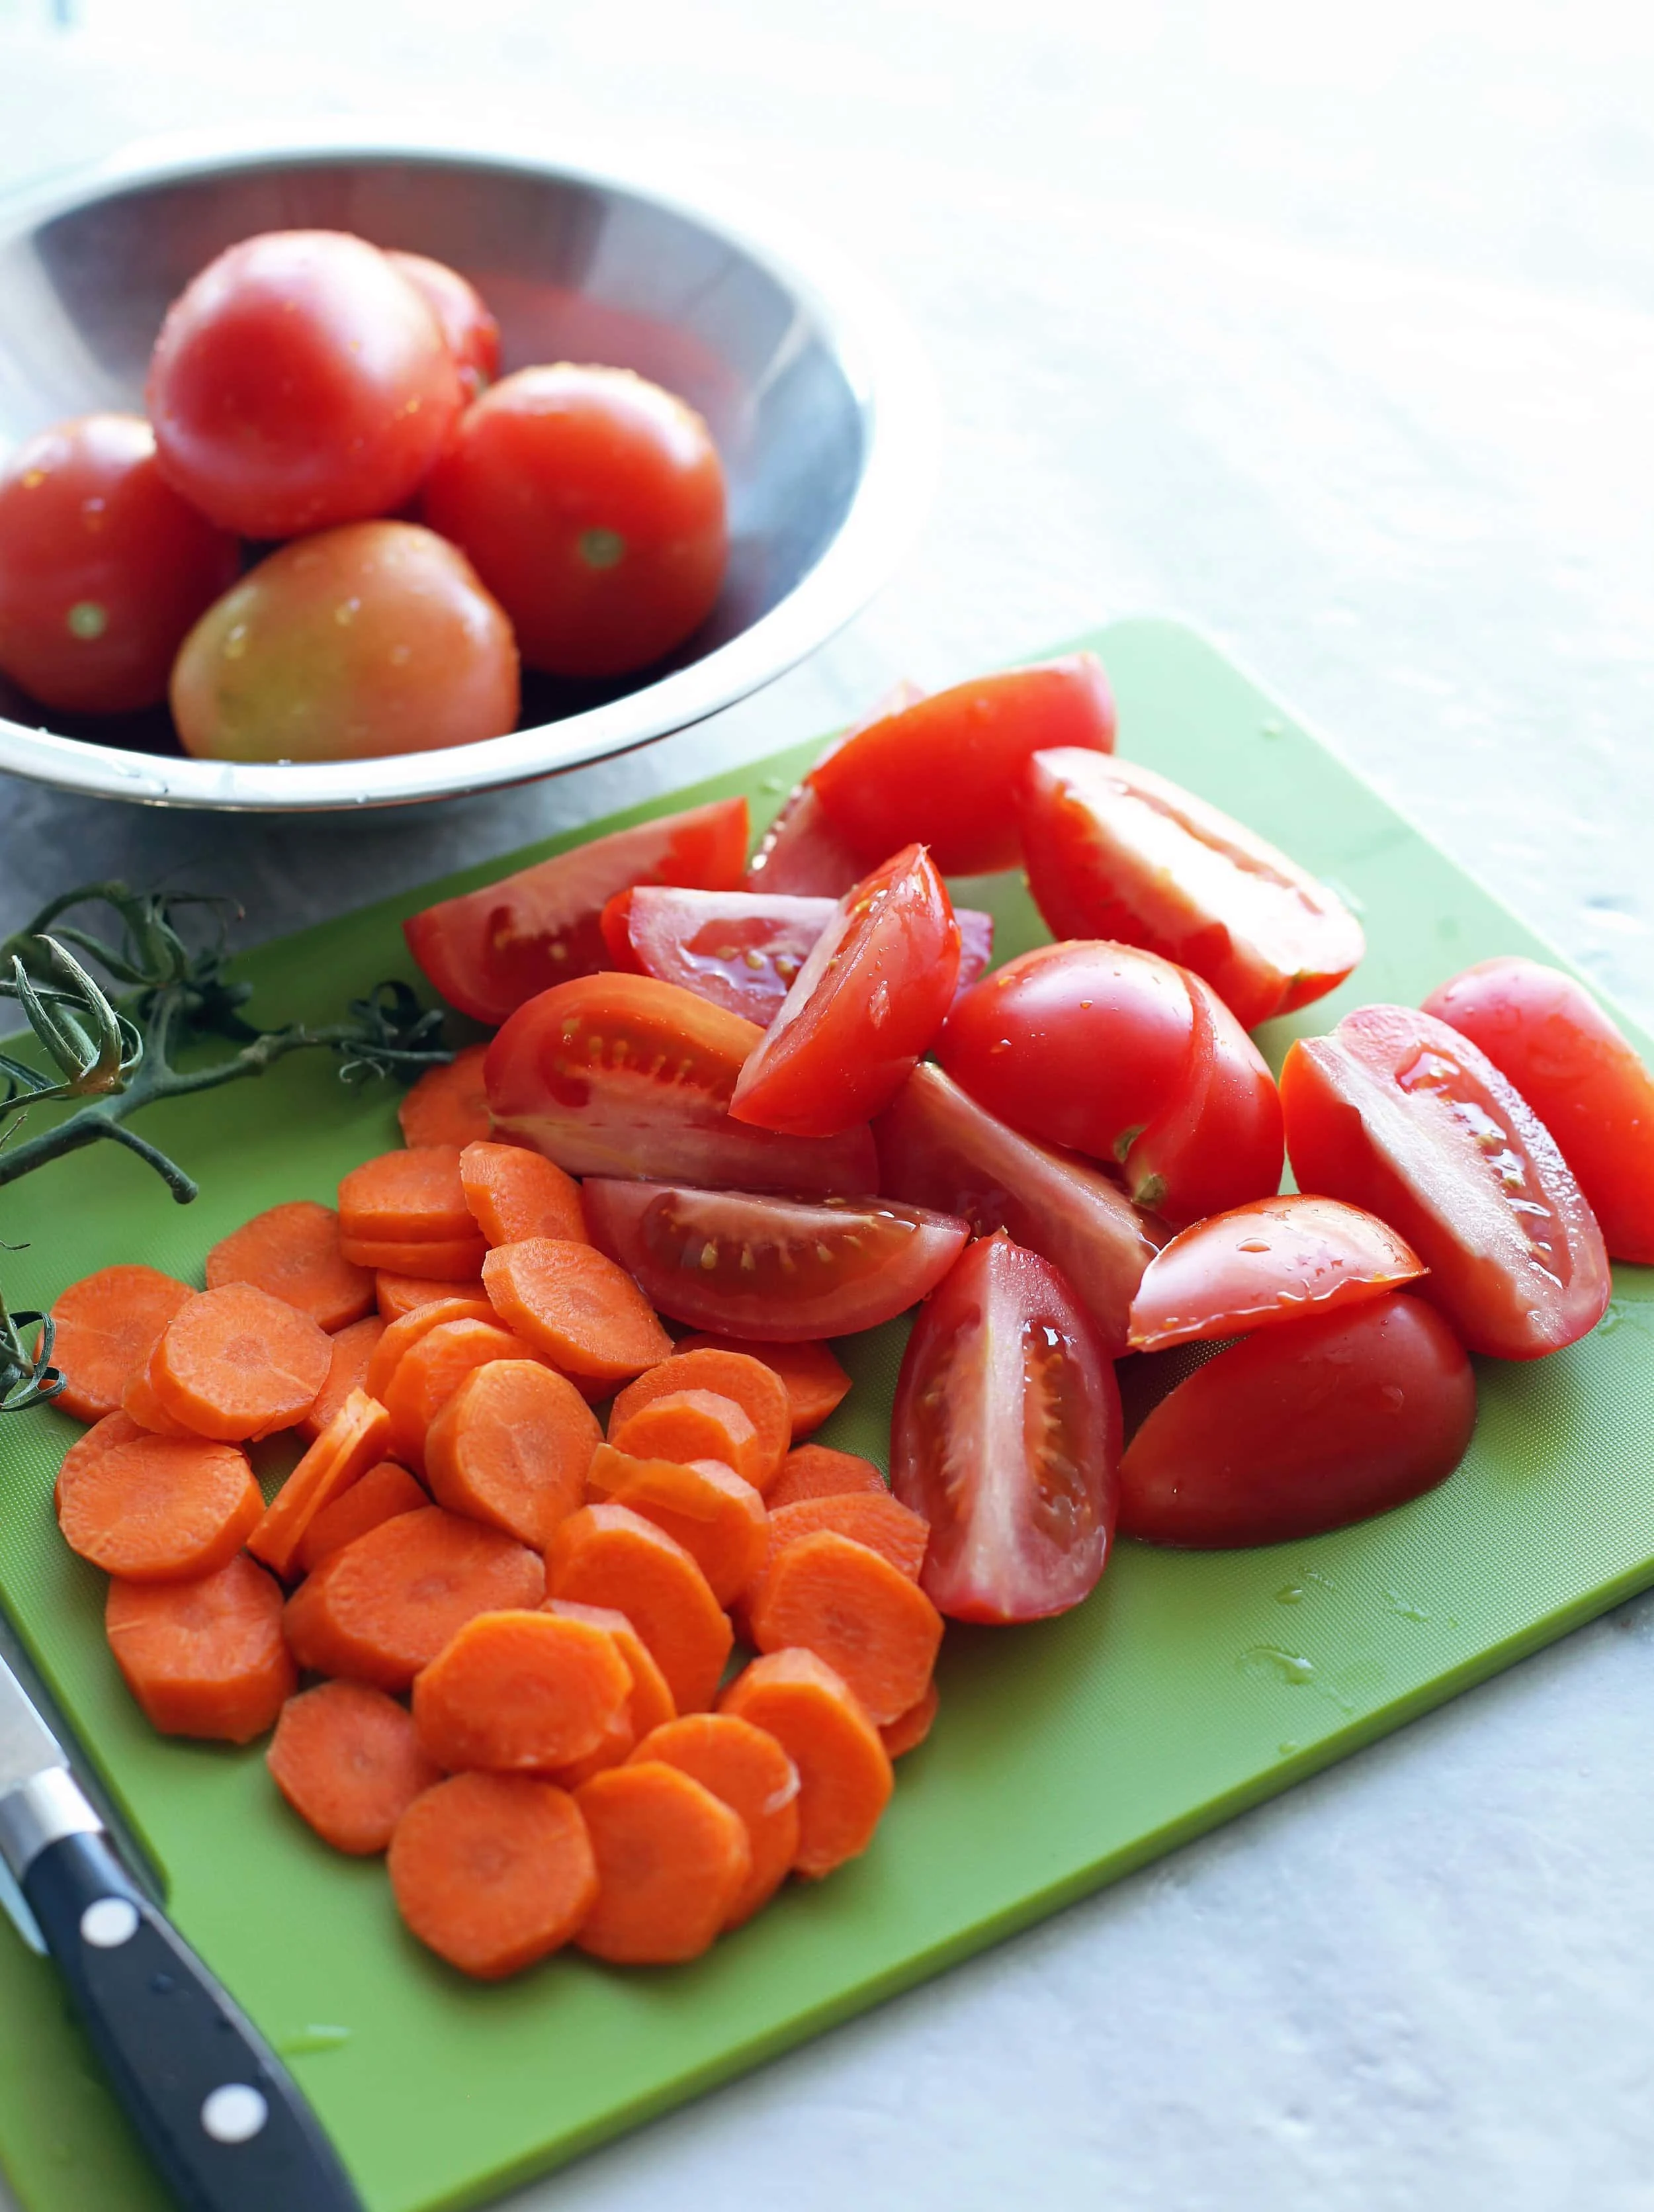 Chopped carrots and quartered Roma tomatoes on a green cutting board.